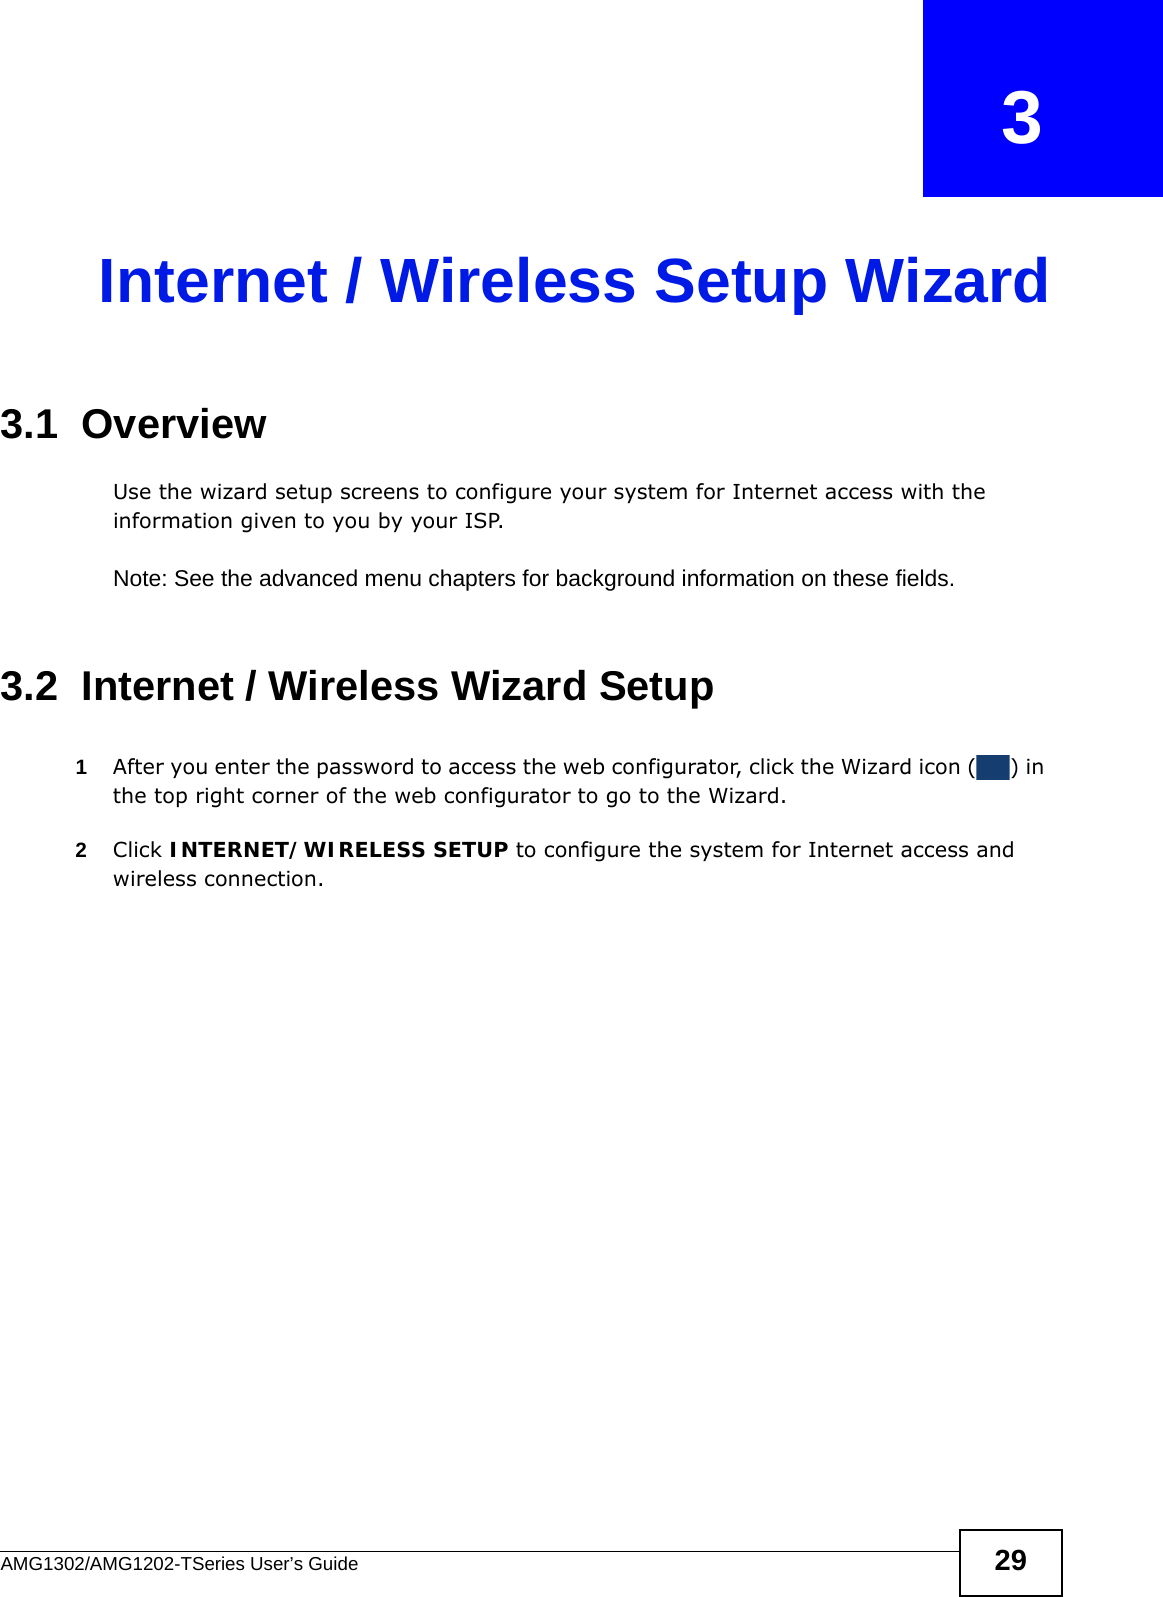 AMG1302/AMG1202-TSeries User’s Guide 29CHAPTER   3Internet / Wireless Setup Wizard3.1  OverviewUse the wizard setup screens to configure your system for Internet access with the information given to you by your ISP. Note: See the advanced menu chapters for background information on these fields.3.2  Internet / Wireless Wizard Setup1After you enter the password to access the web configurator, click the Wizard icon ( ) in the top right corner of the web configurator to go to the Wizard. 2Click INTERNET/WIRELESS SETUP to configure the system for Internet access and wireless connection.